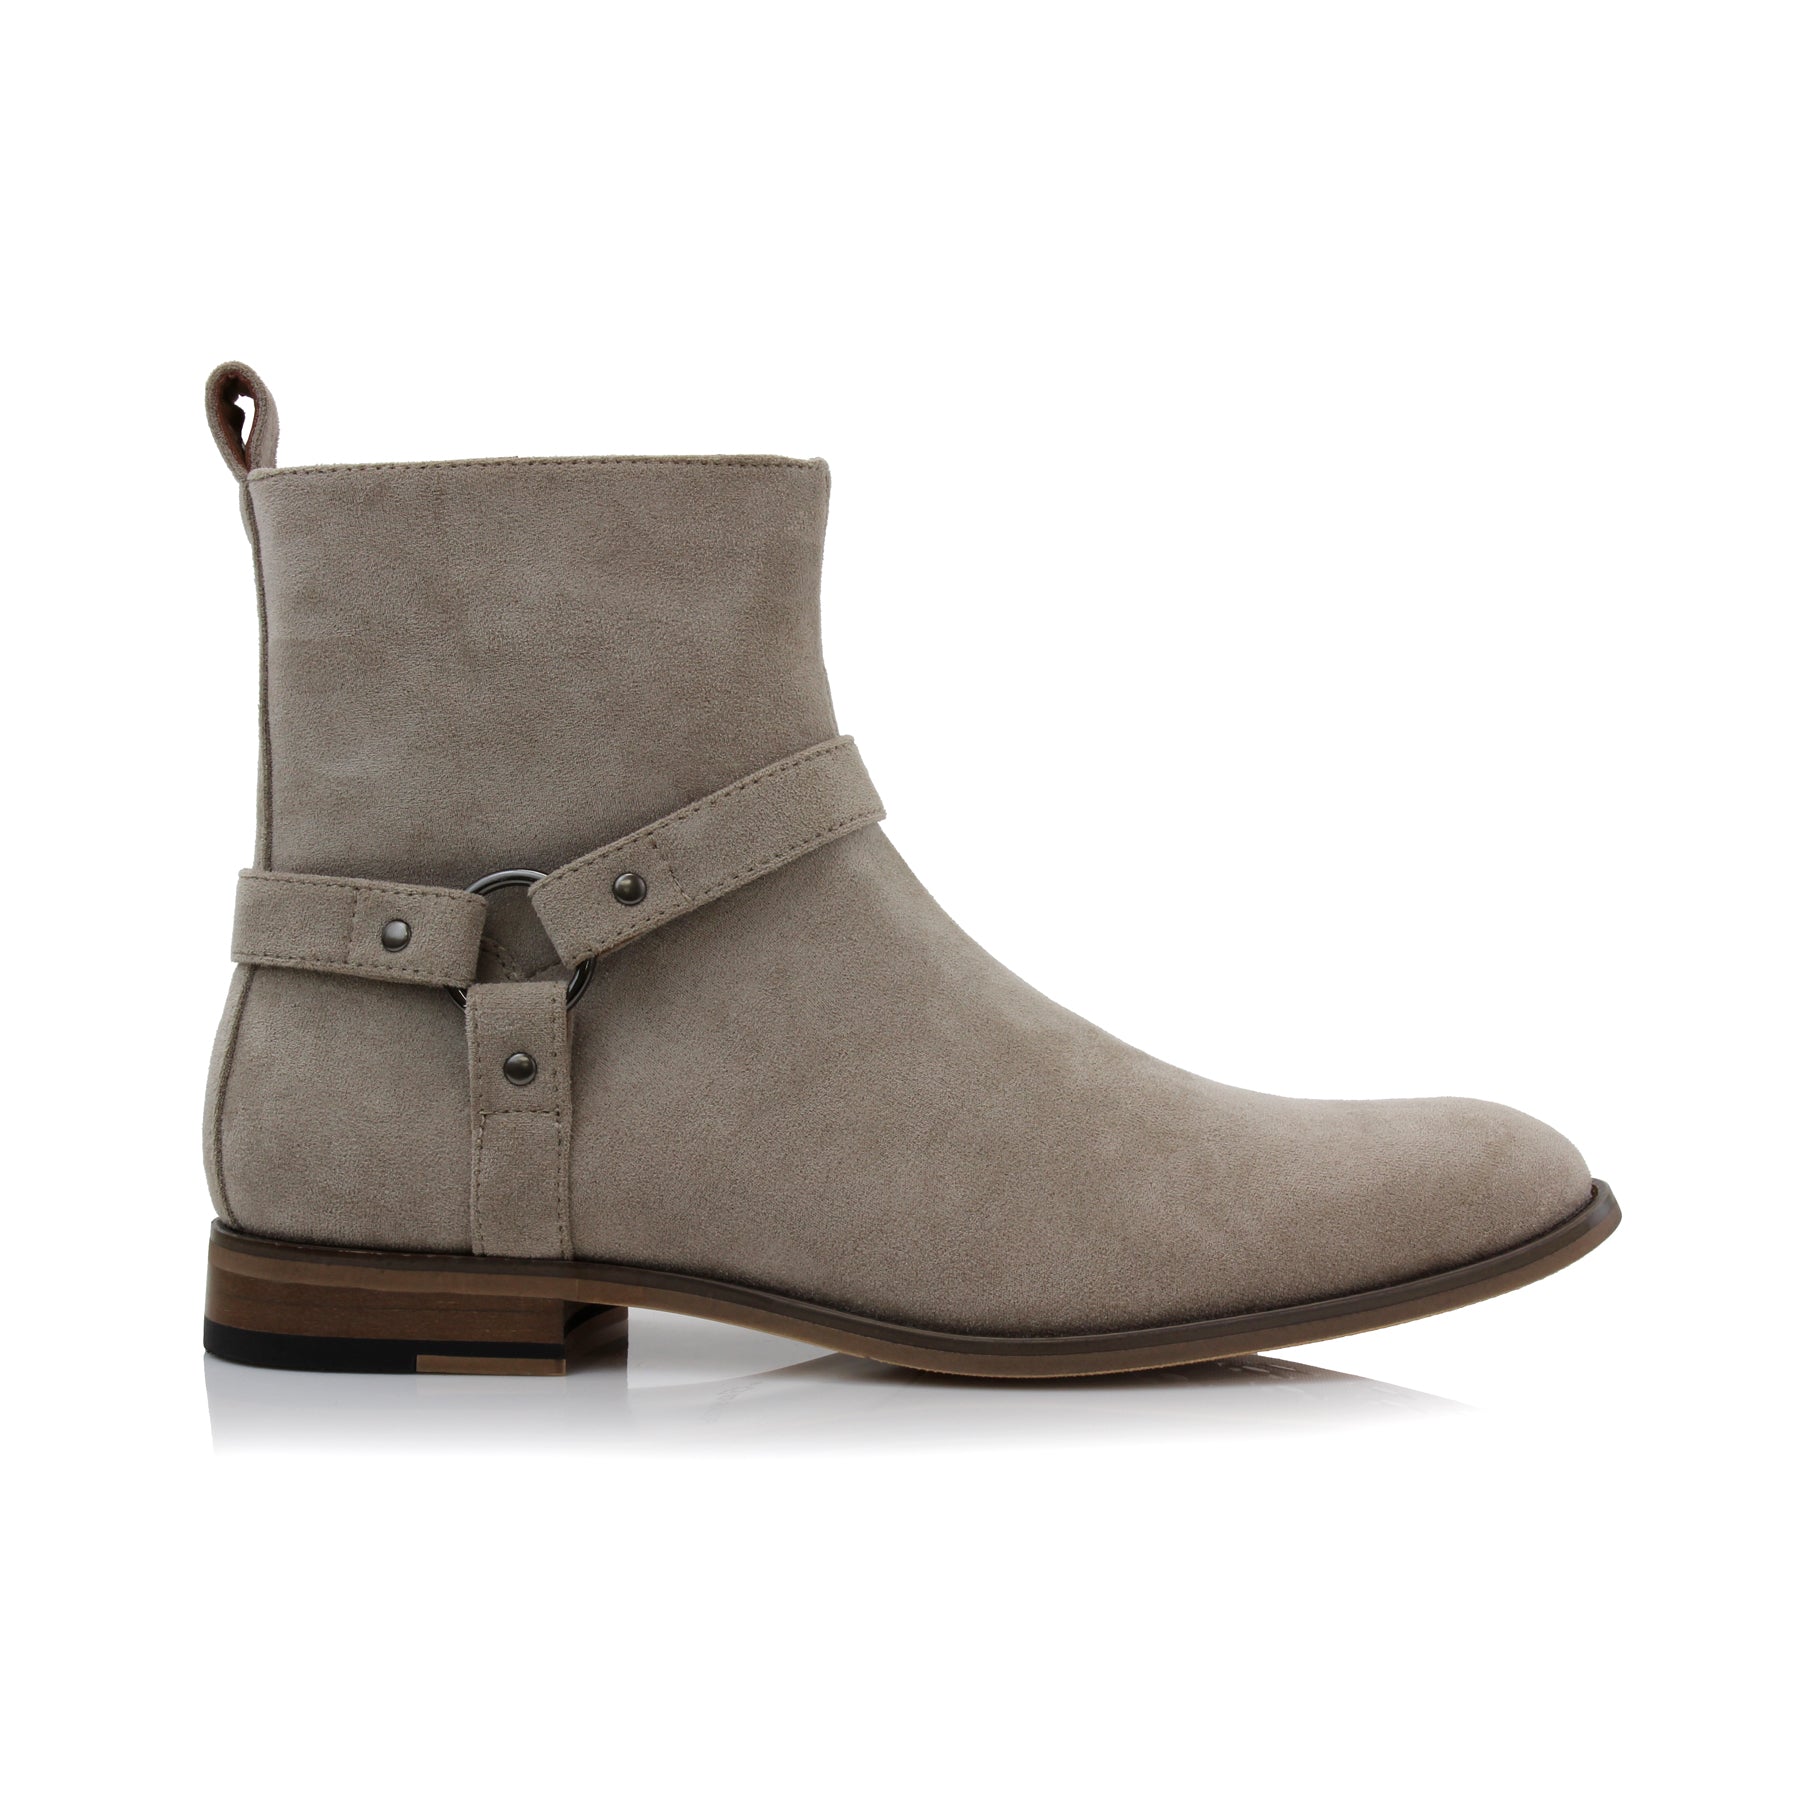 Suede Modern Western Ankle Boots | Rhett by Polar Fox | Conal Footwear | Outer Side Angle View